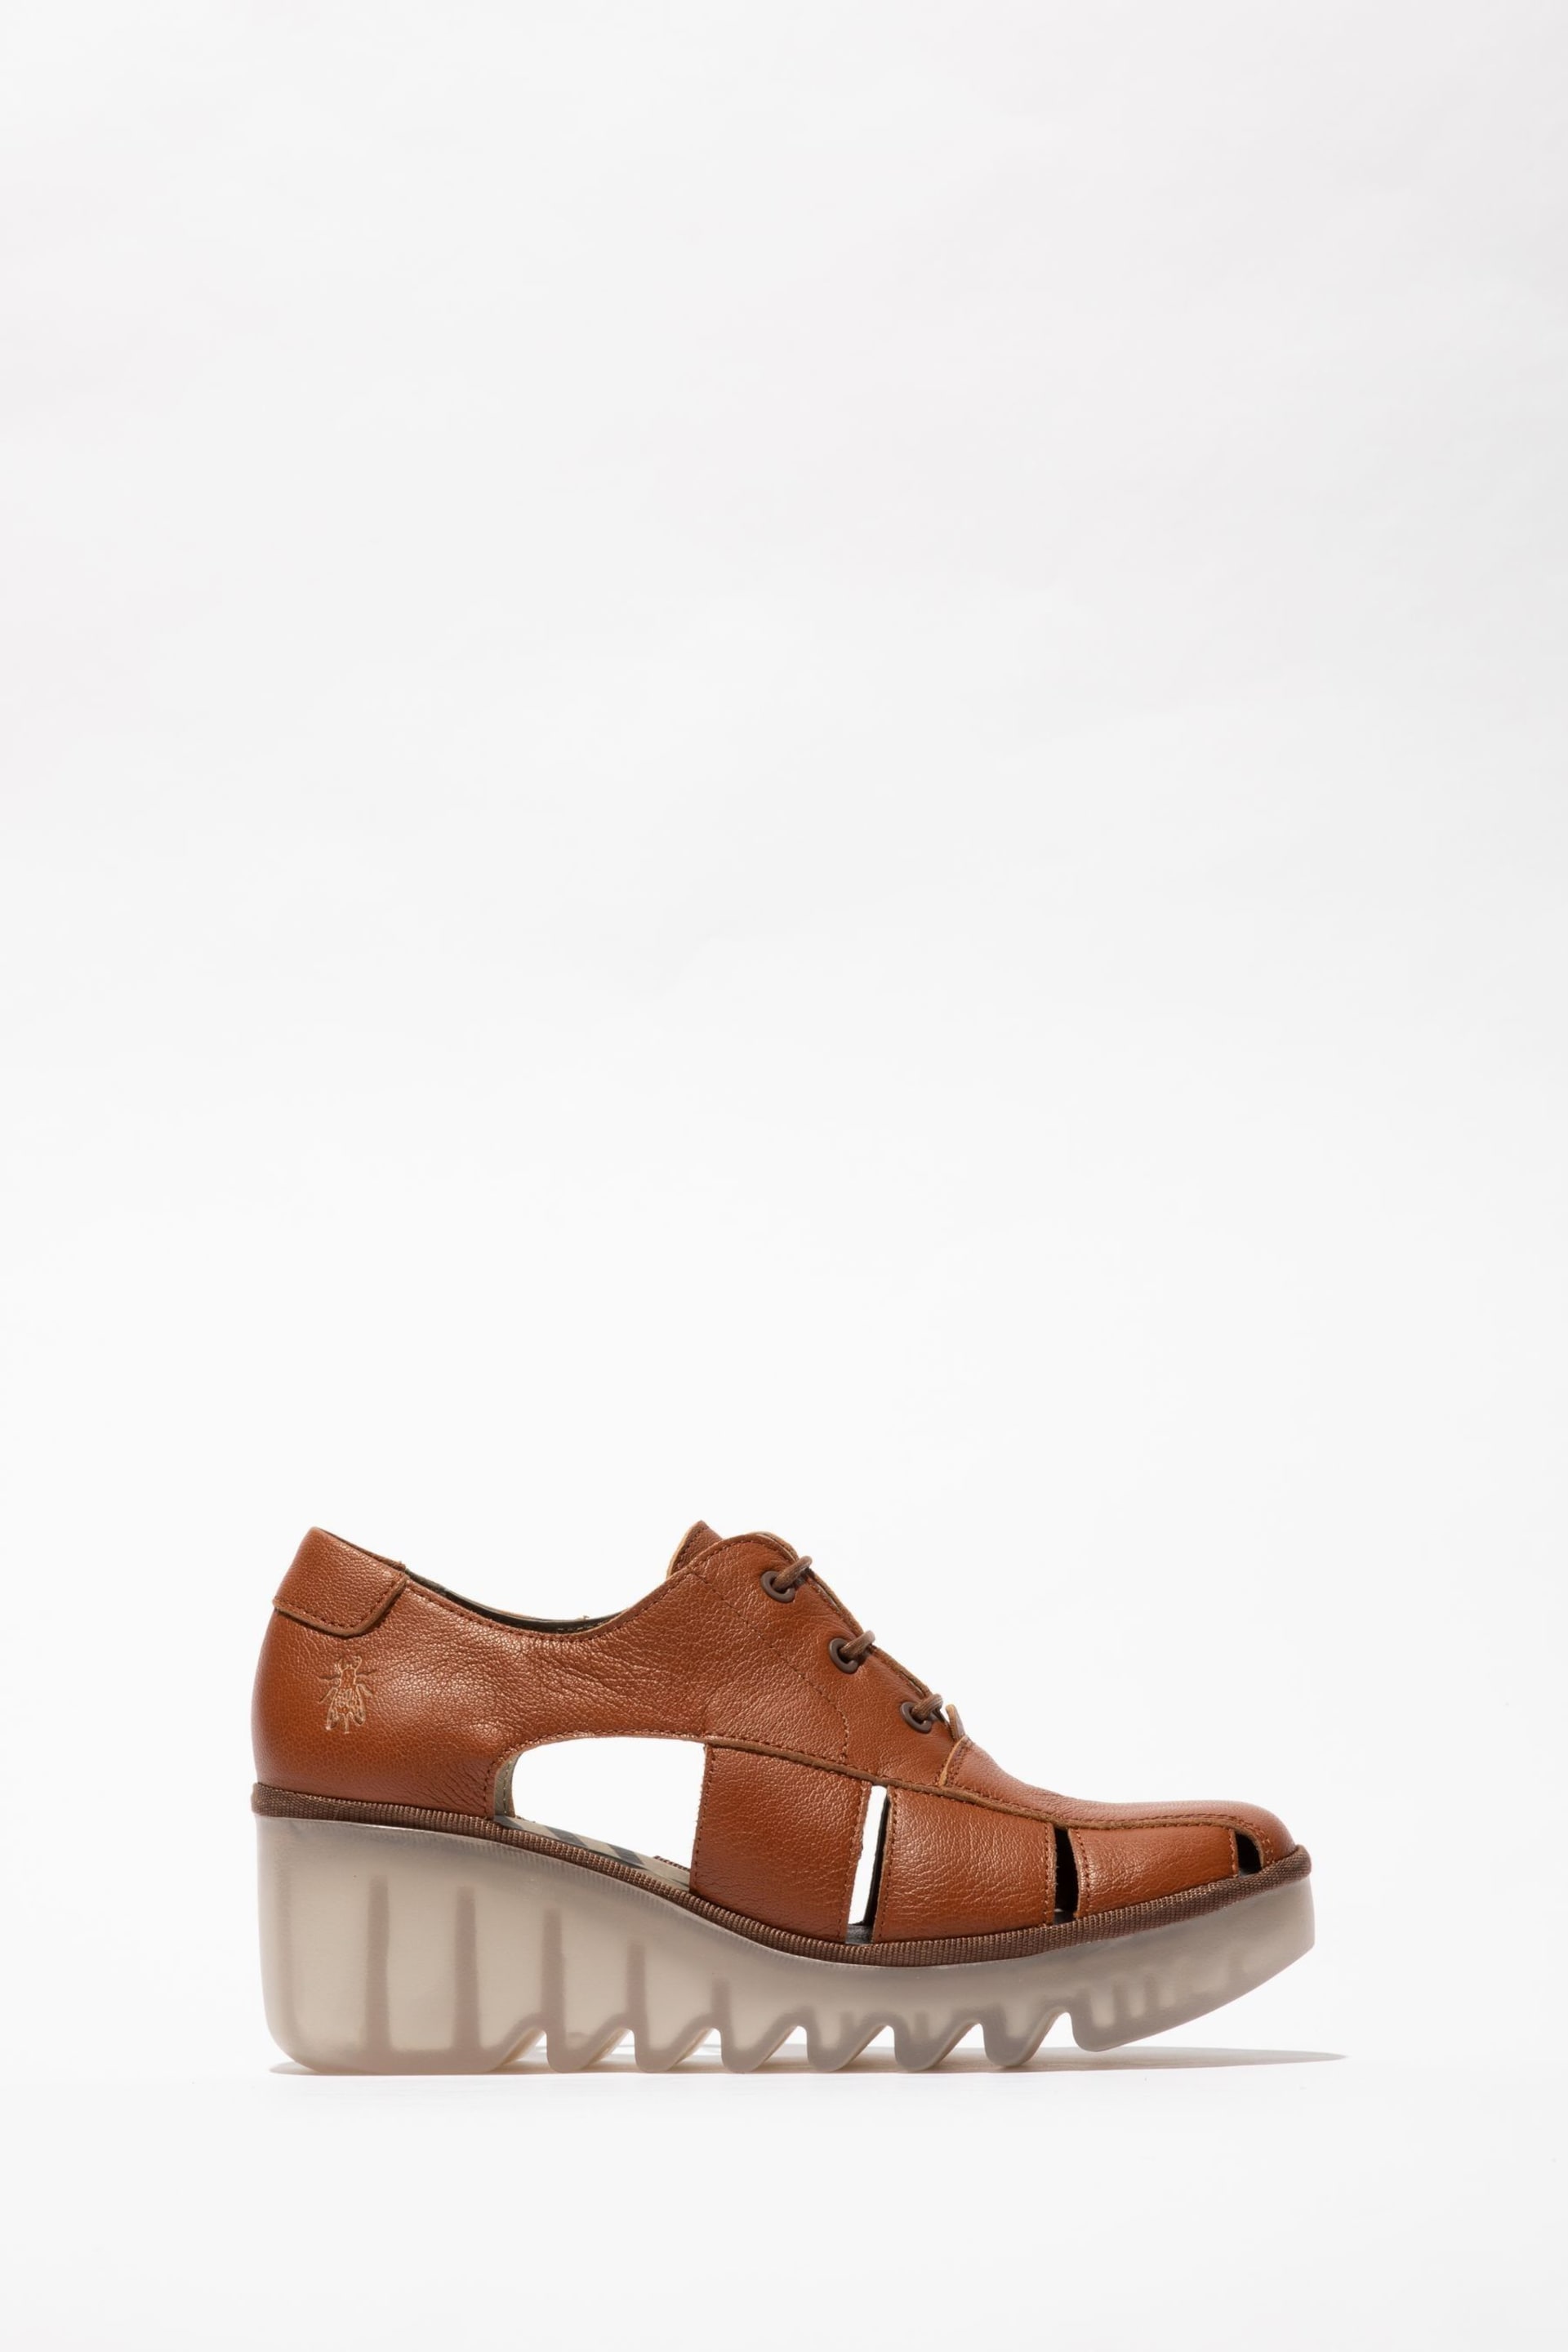 Fly London Bogi Brown Shoes - Image 1 of 4